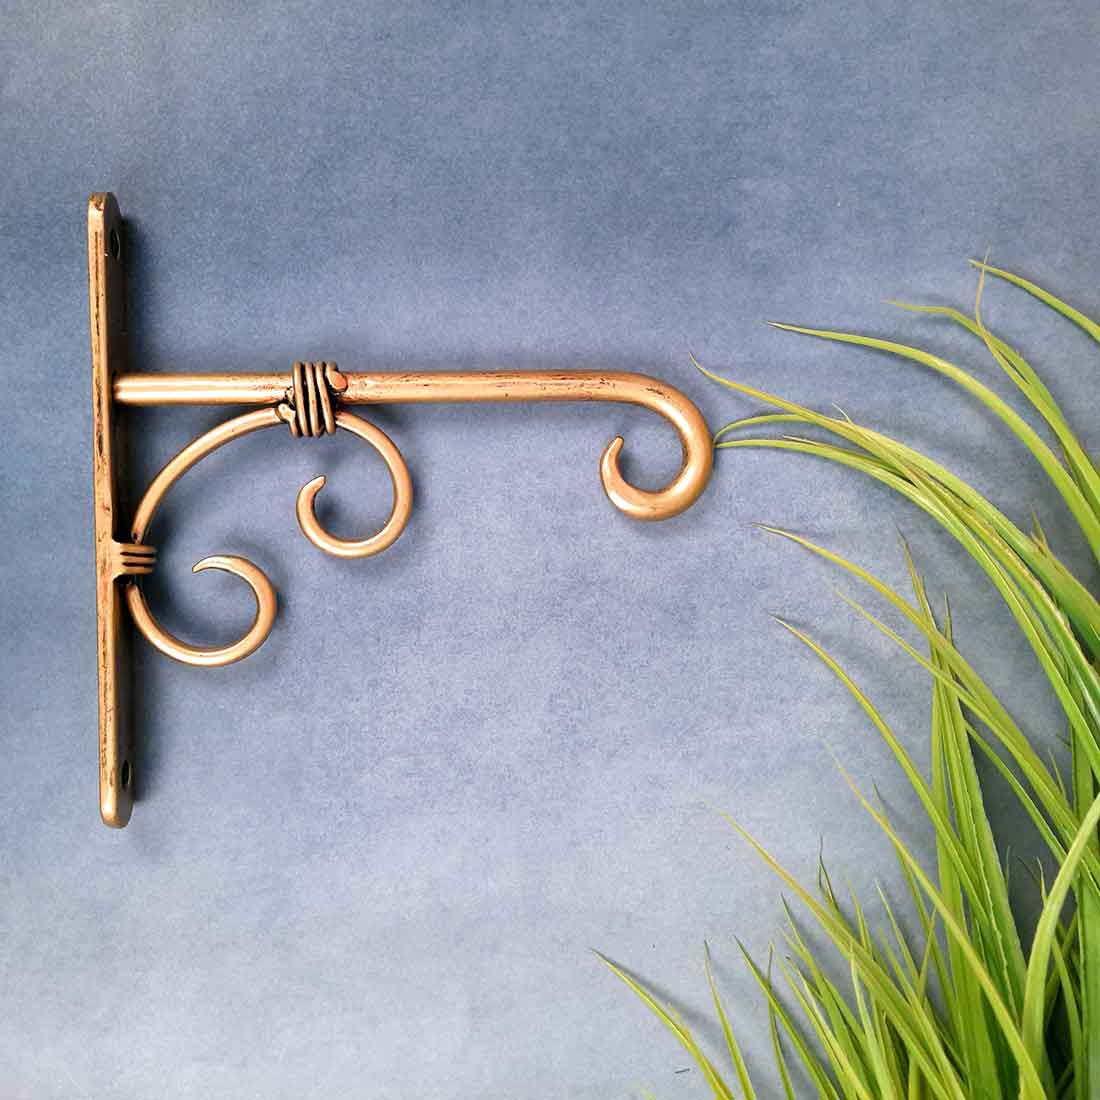 Wall Hanging Hooks - For Hanging Pots, Plants & Votives | Decorative Metal  Wall Hook Holder - For Home, Entrance, Office Decor & Gifts - 8 Inch